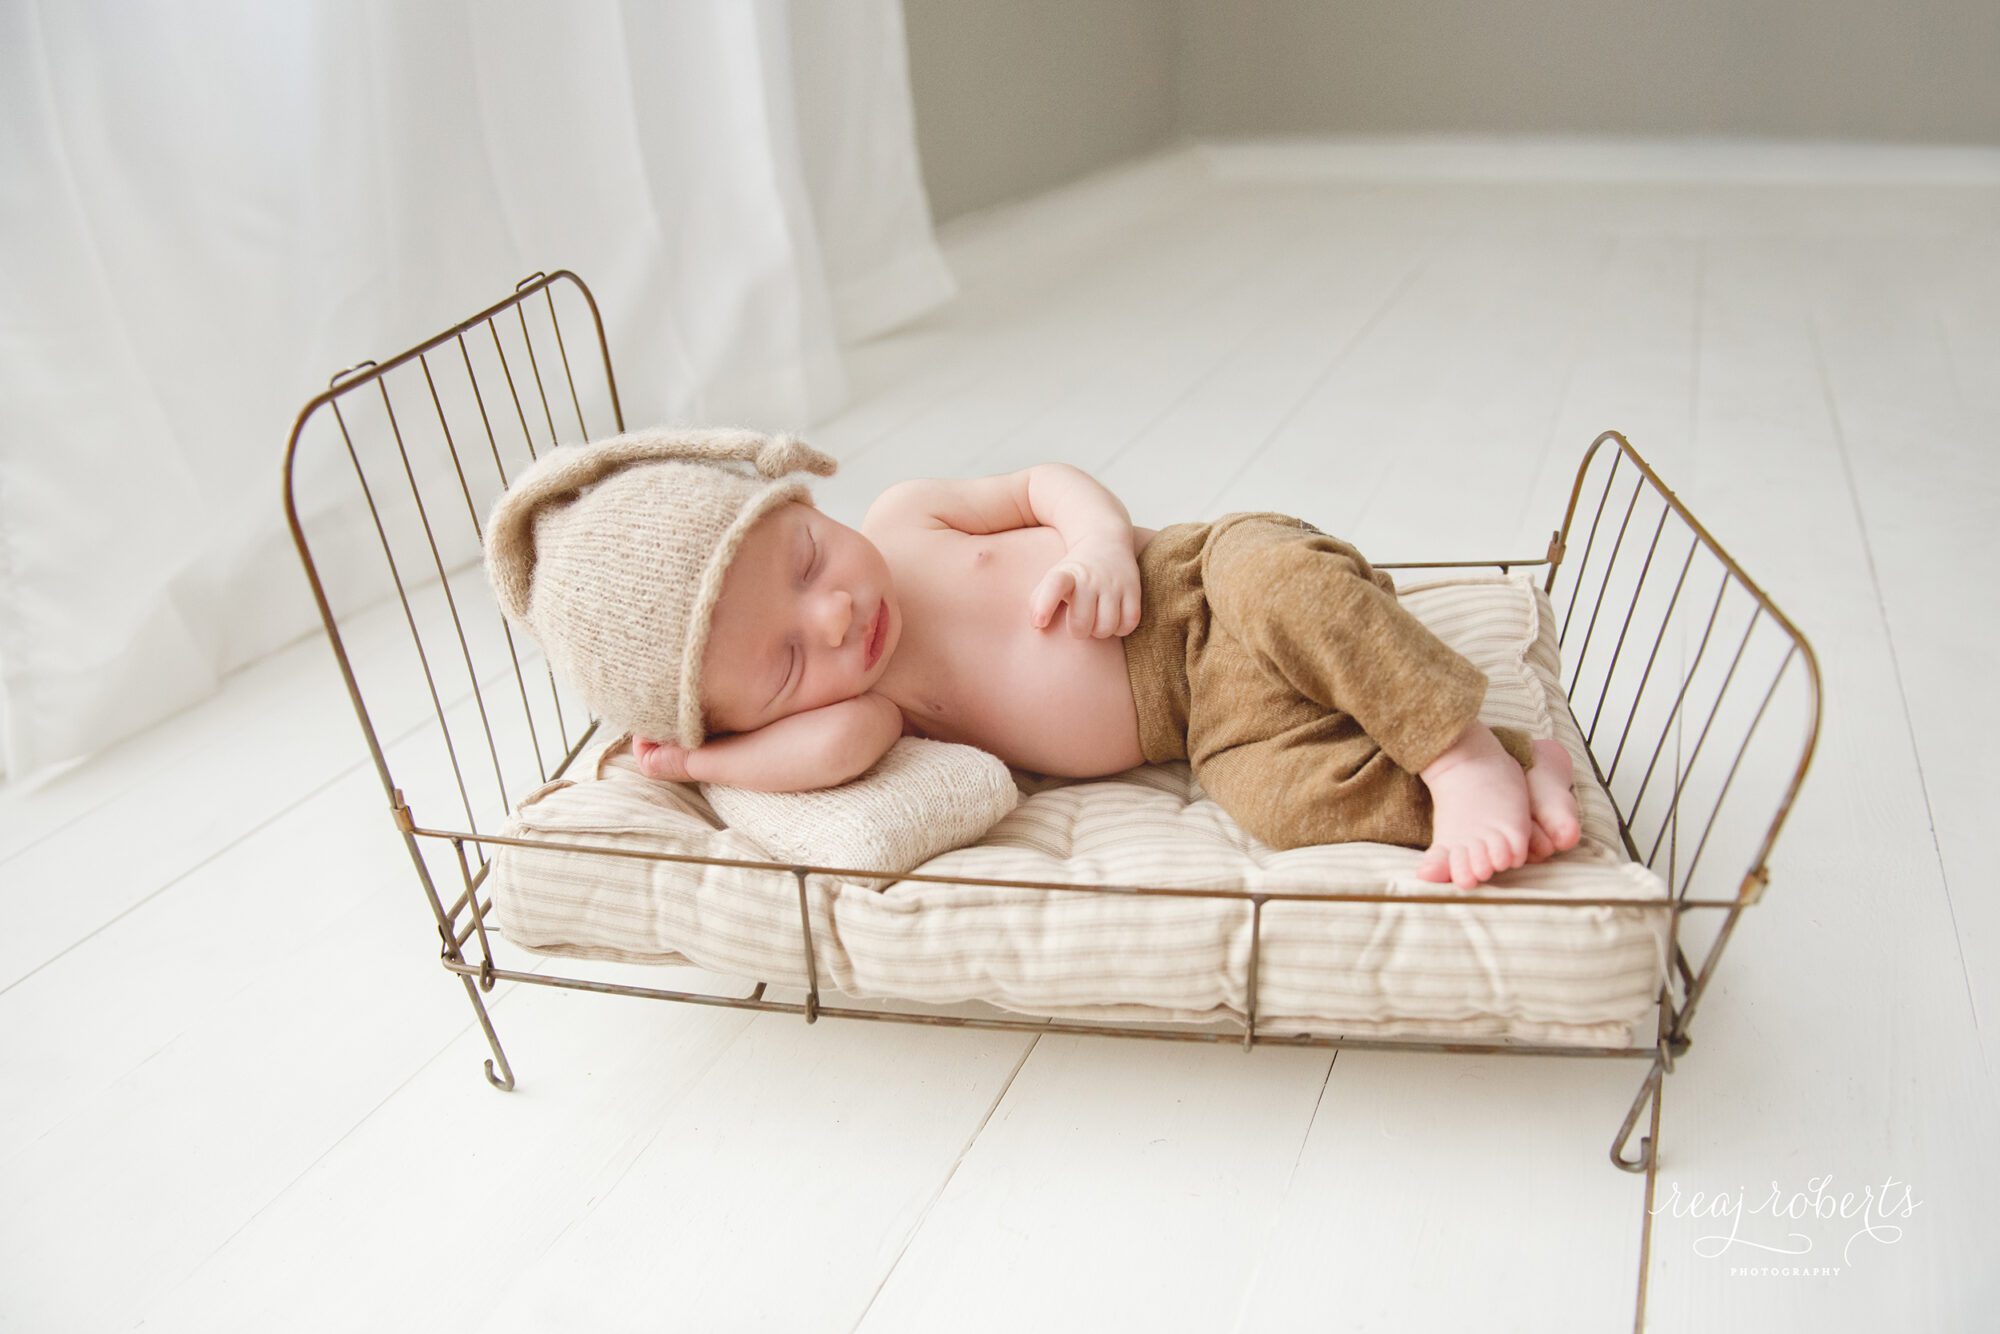 Newborn on wire bed with sleep cap | Reaj Roberts Photography | Chandler area photographer